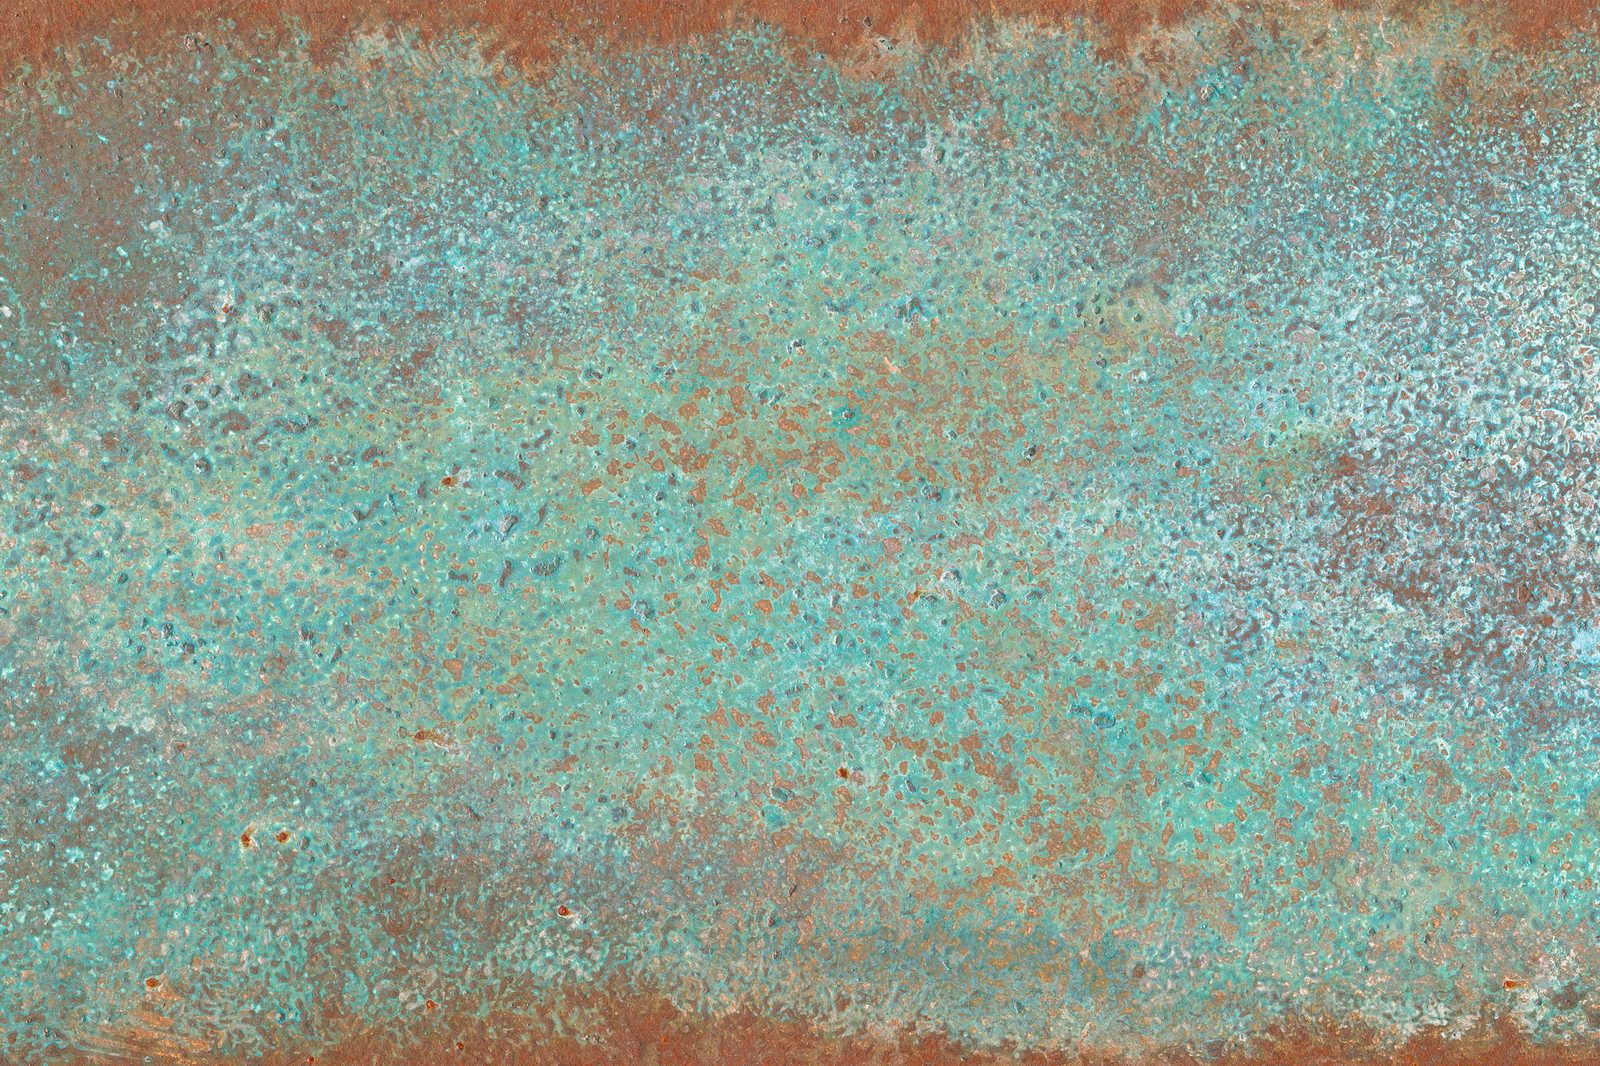             Metal Optics Canvas Painting Turquoise Patina with Rust - 0.90 m x 0.60 m
        